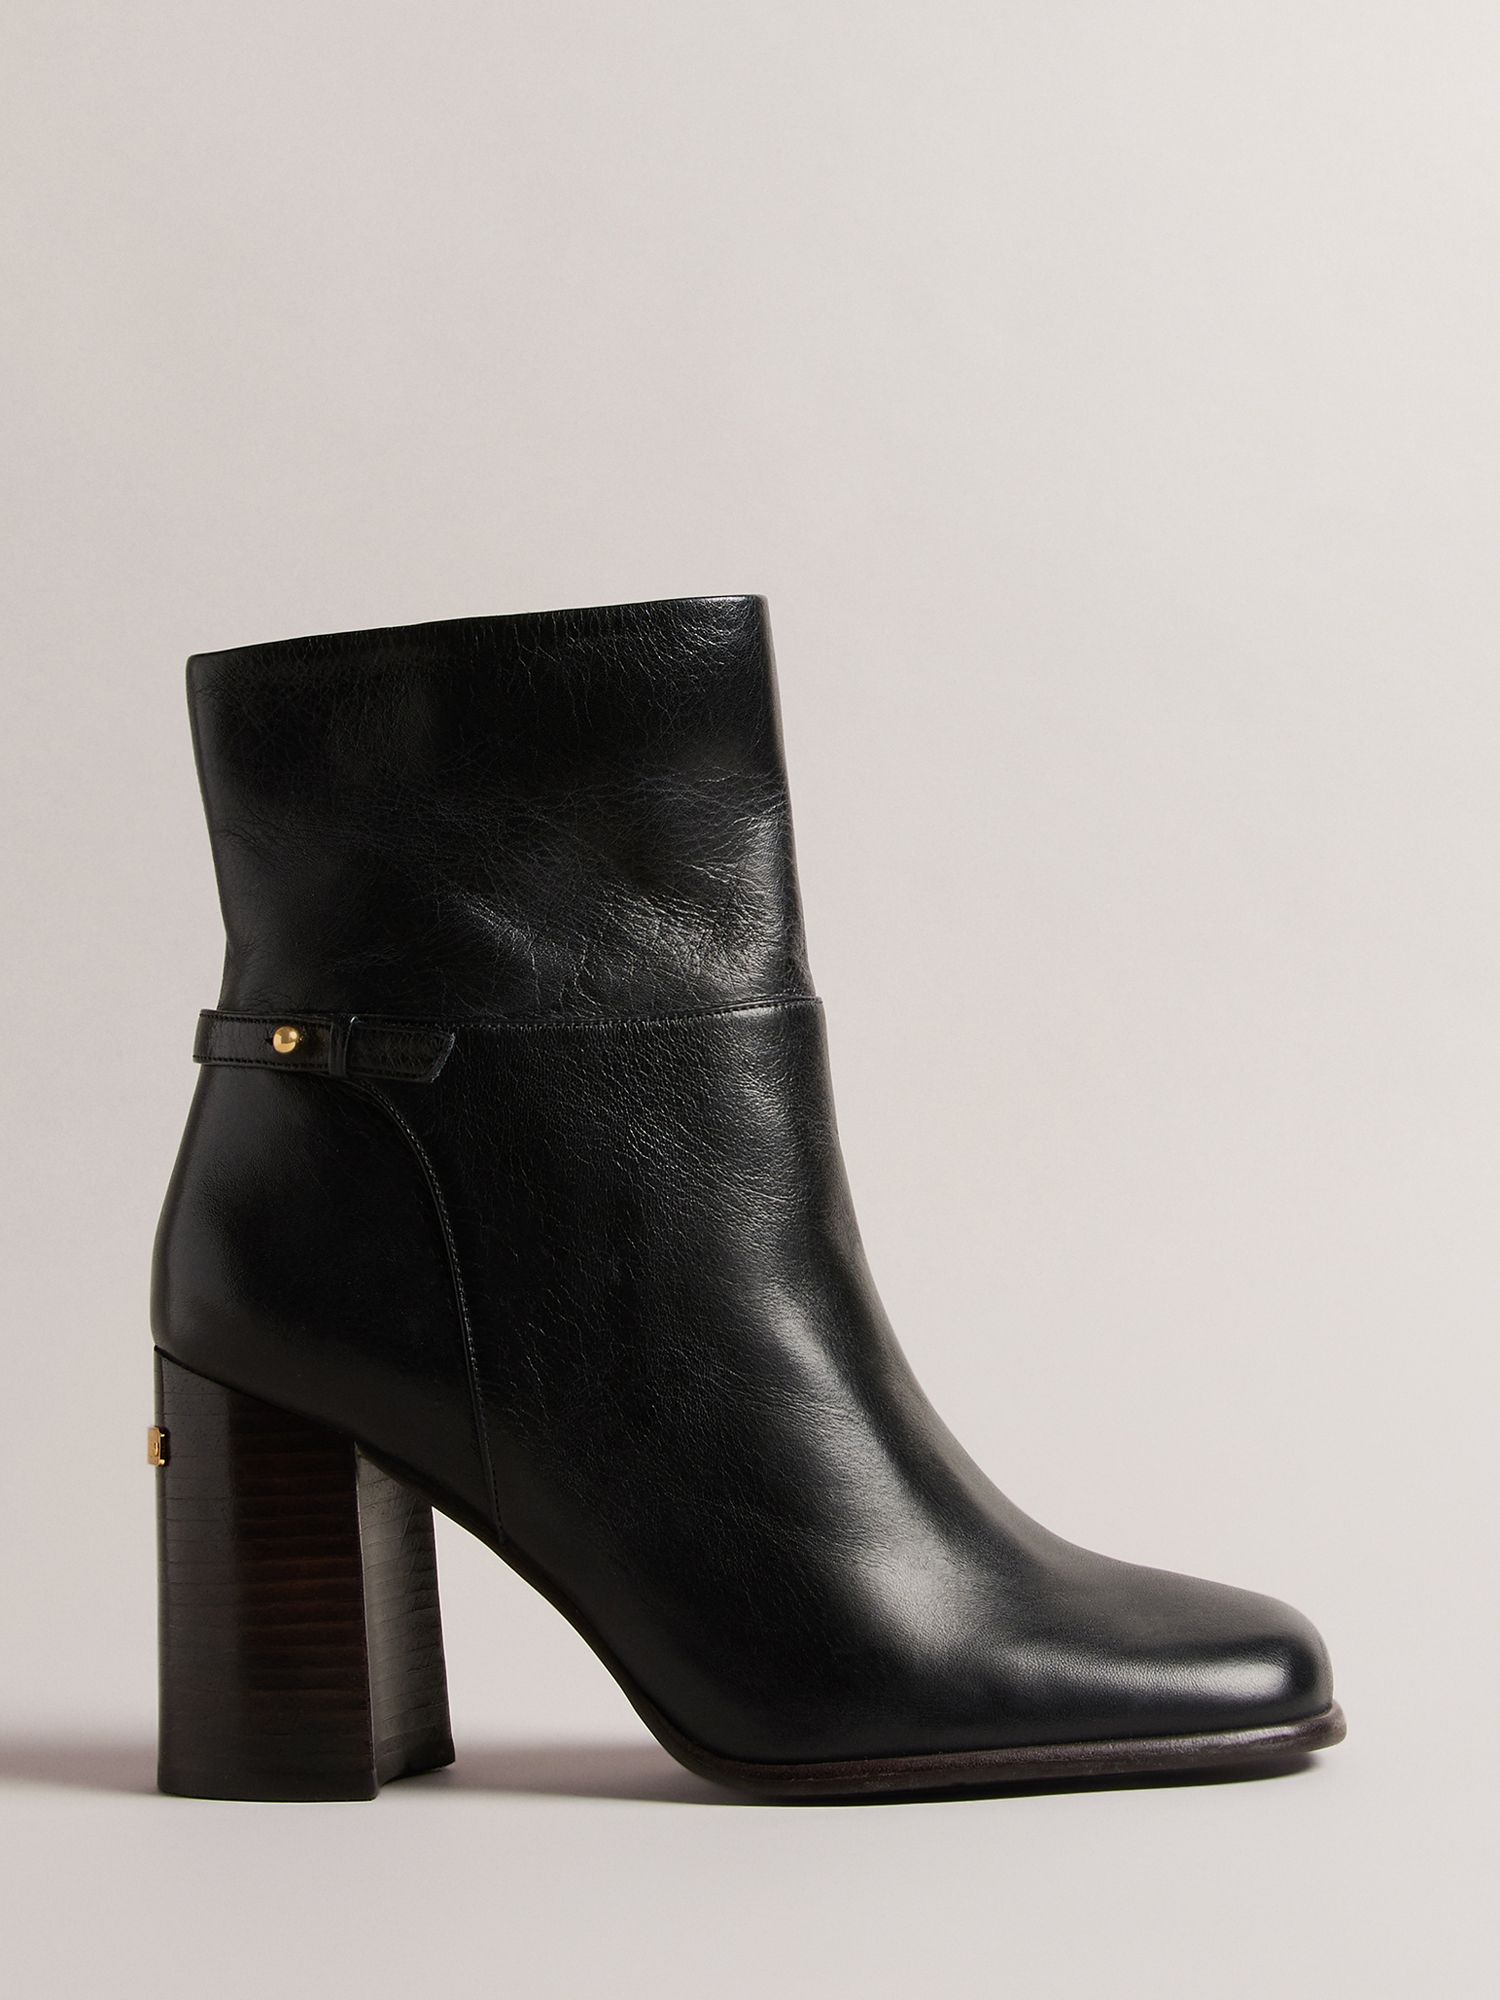 Ted Baker Charina Leather Square Toe Ankle Boots, Black, EU36